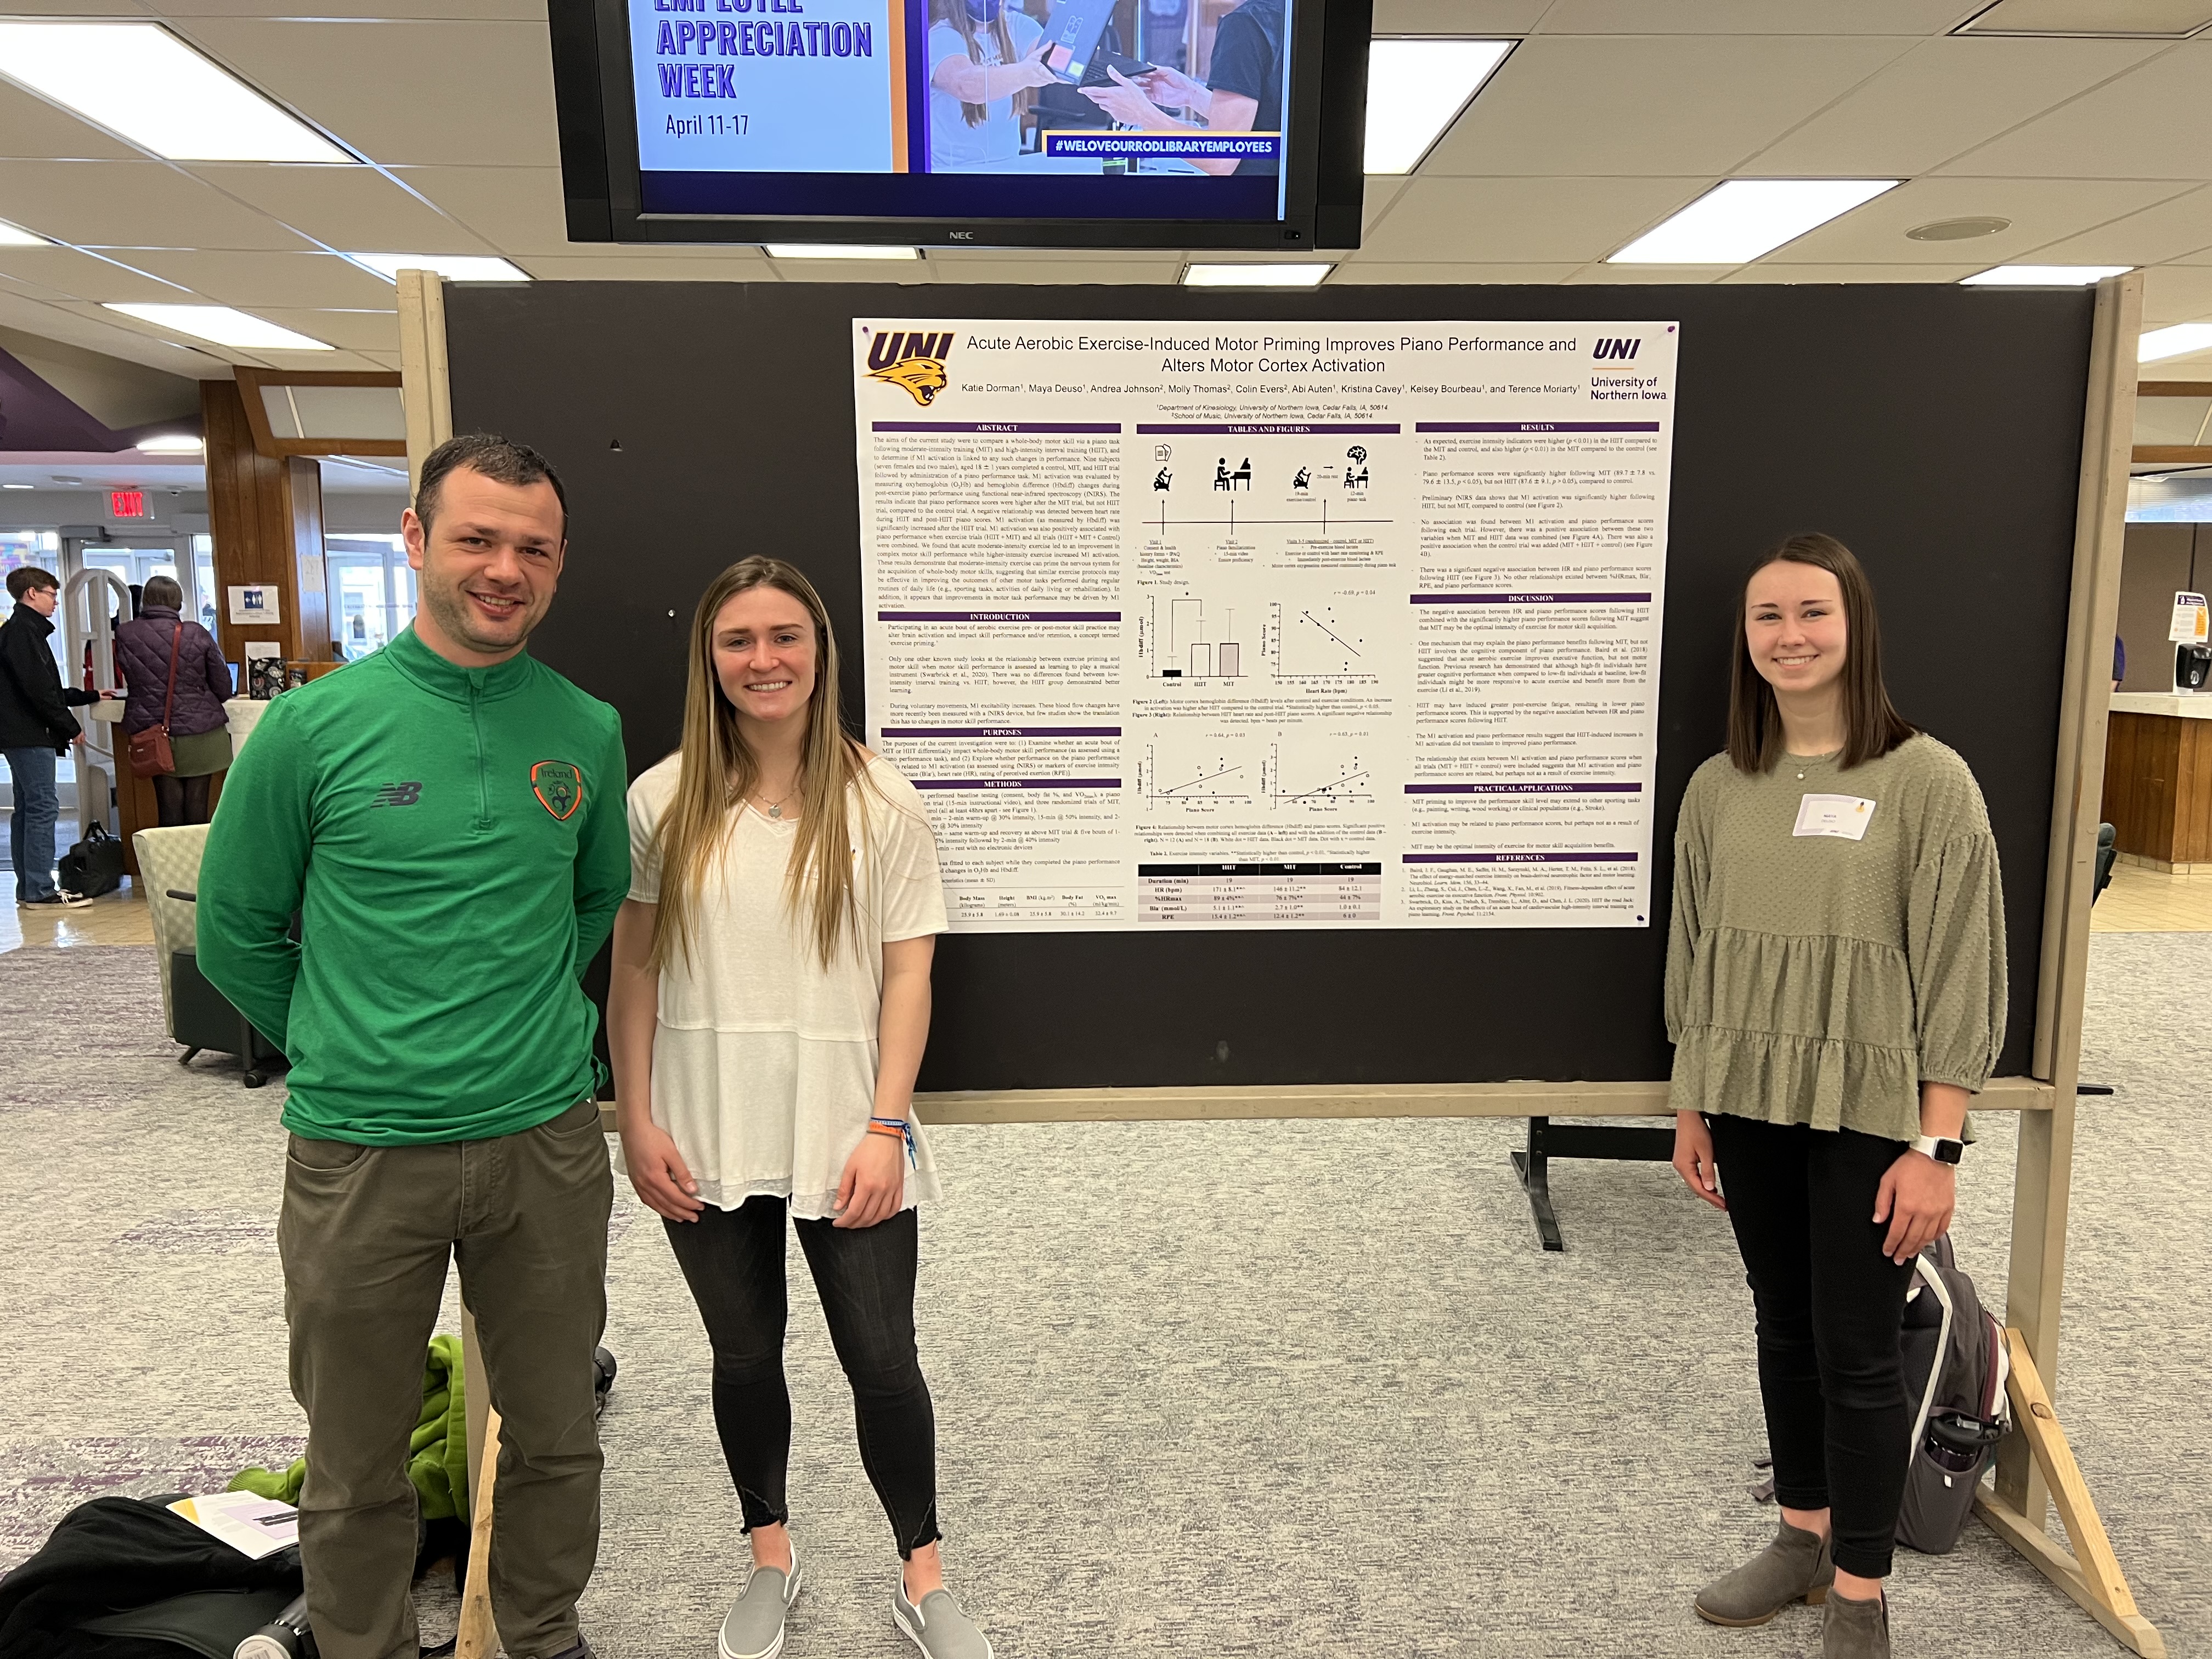 Pre-health students presenting research with professor.